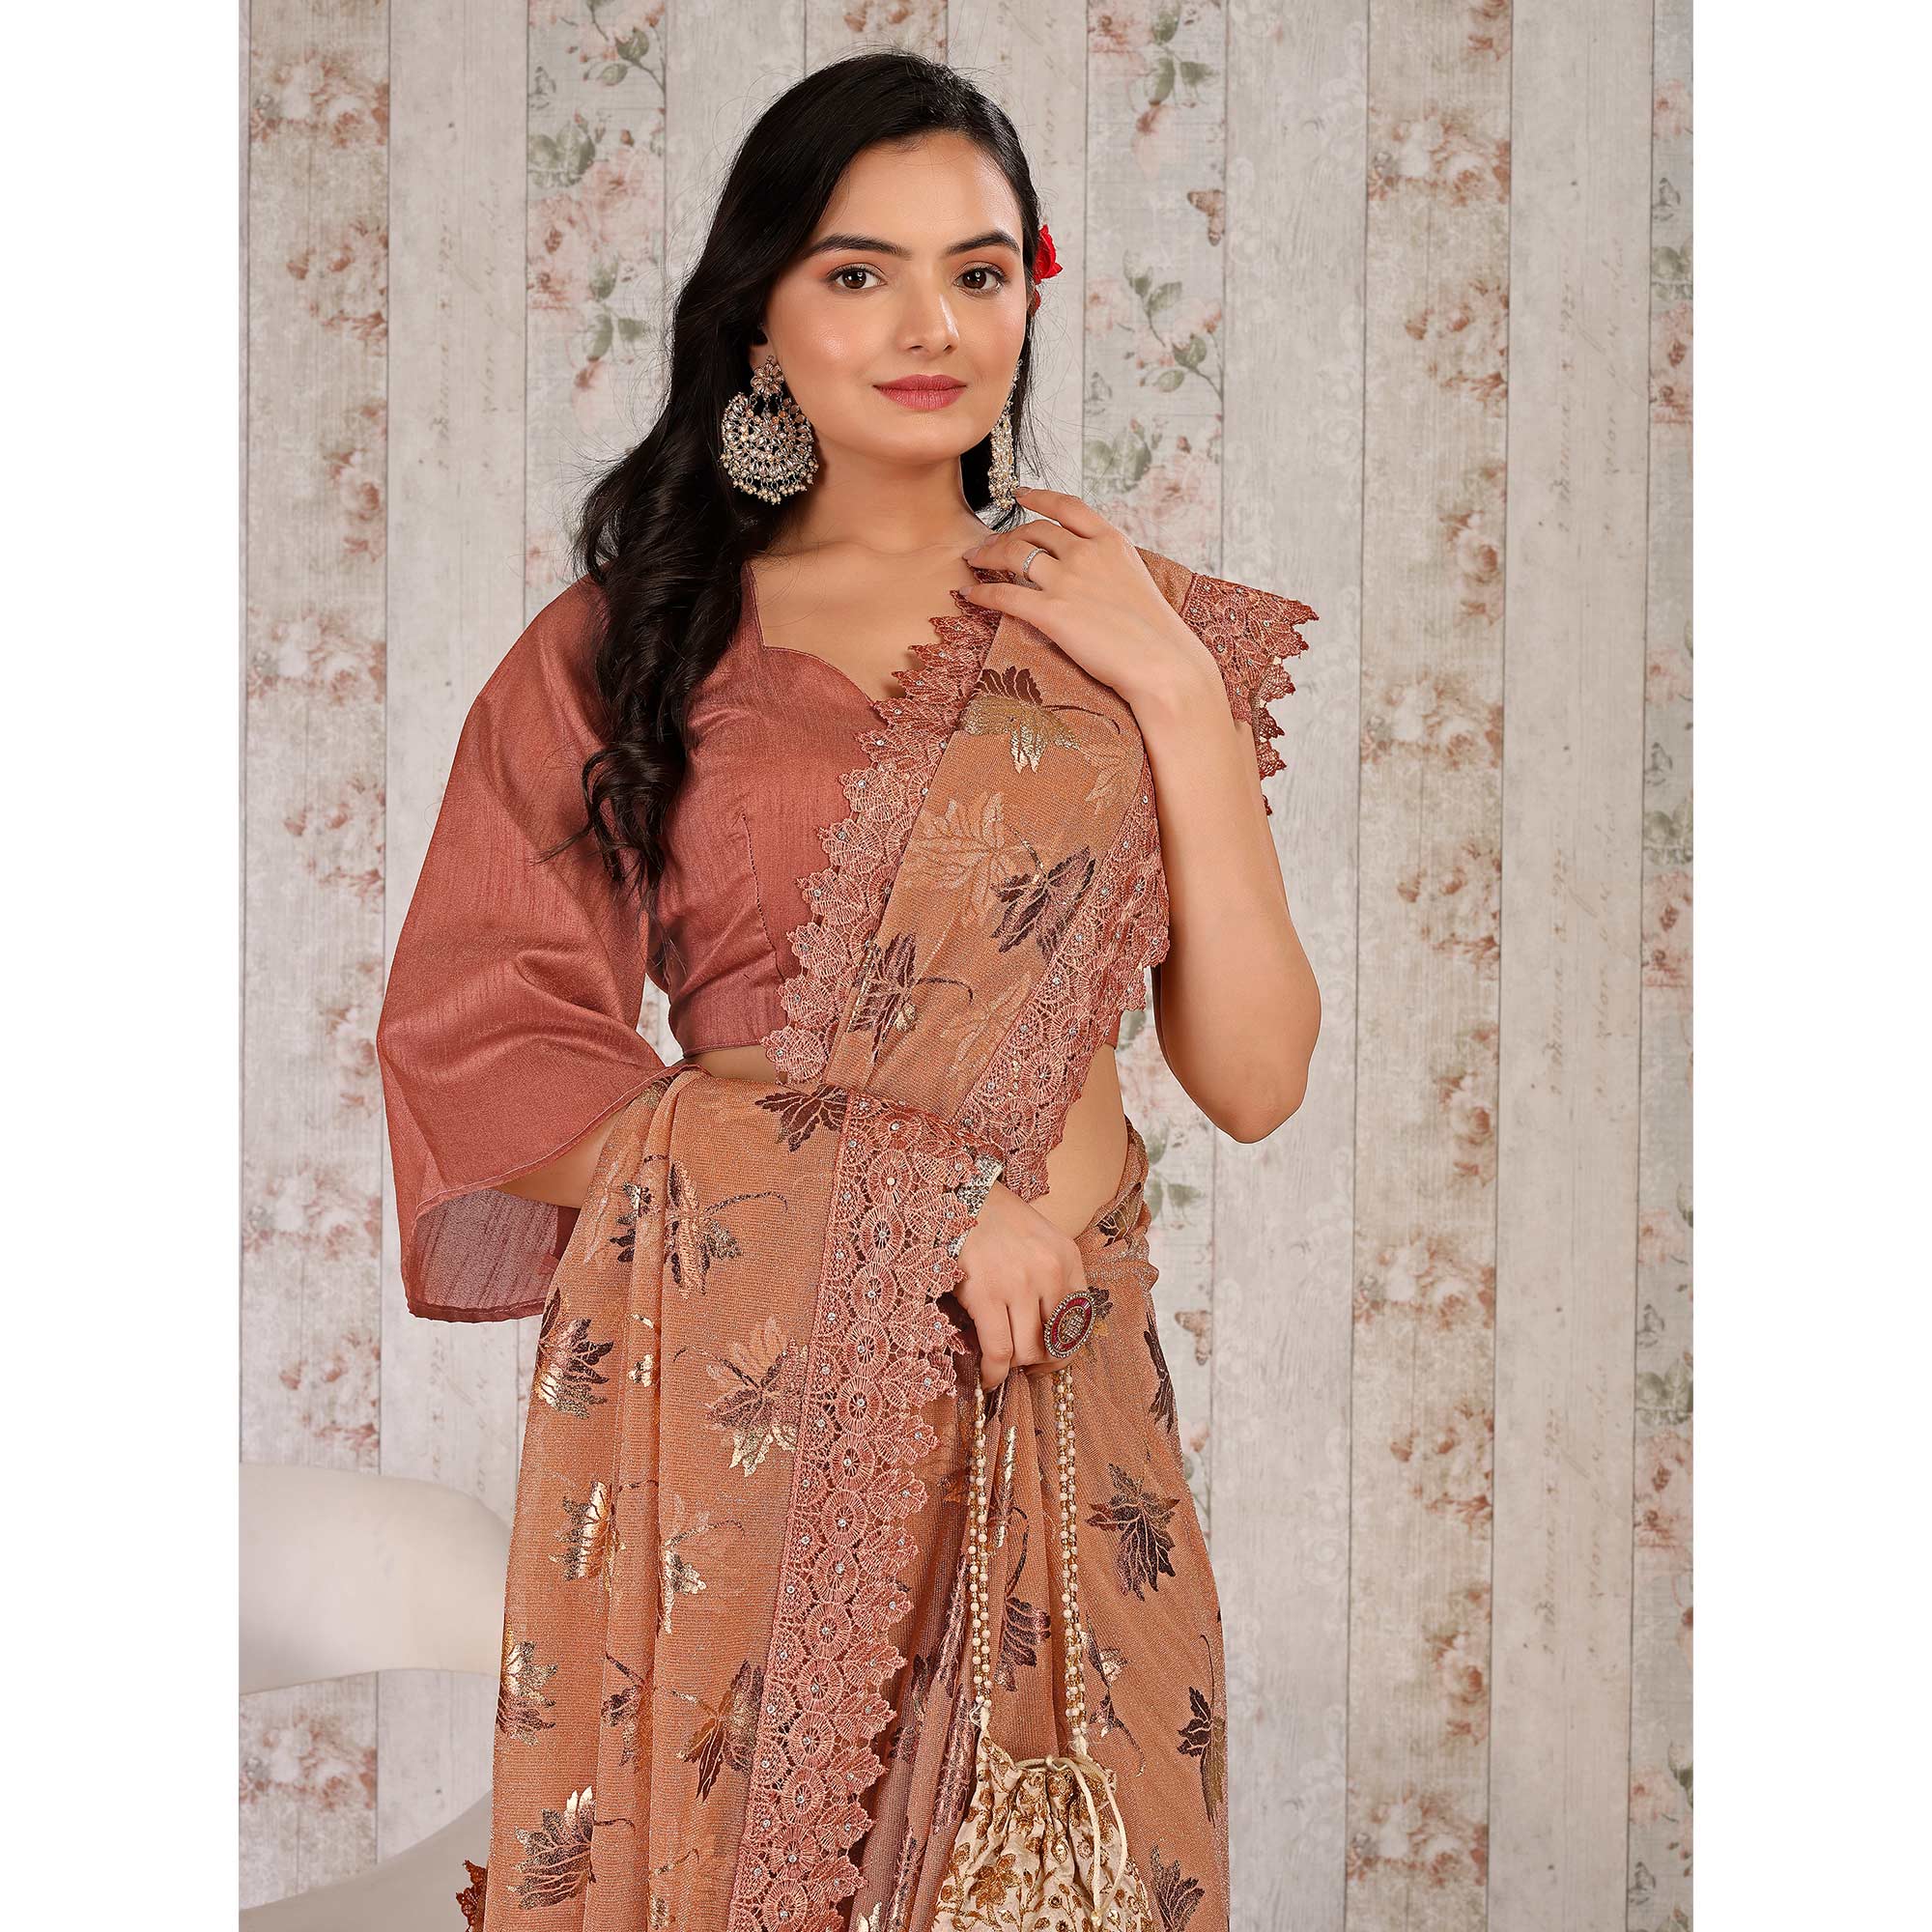 Dusty Peach Foil Printed Lycra Saree With Embroidered Lace Border